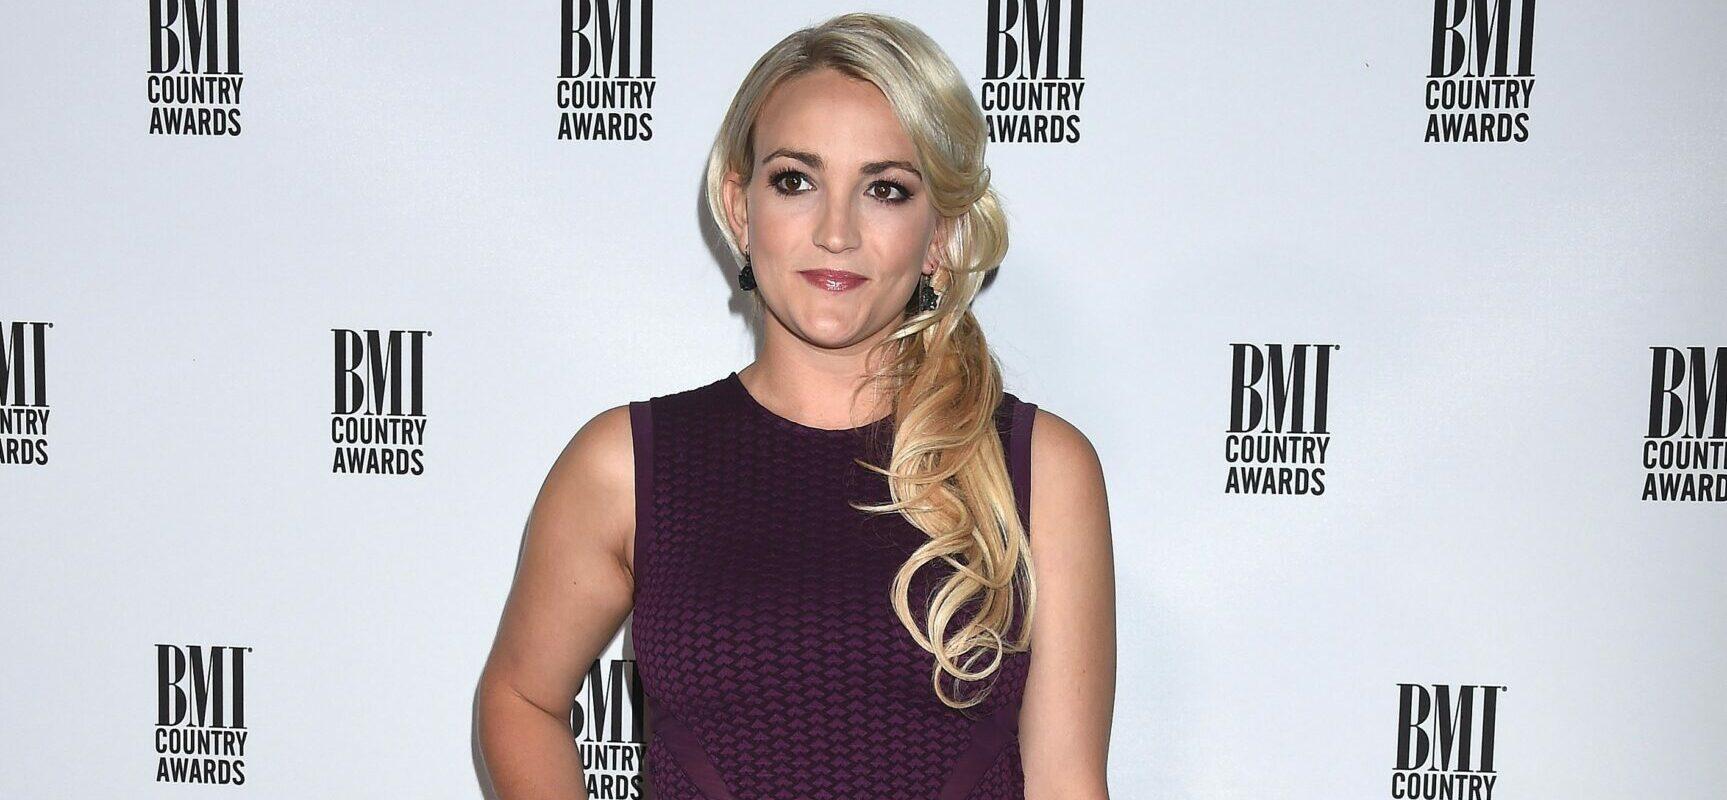 Jamie Lynn Spears Struggles With Being ‘Seen As Her Own Person’